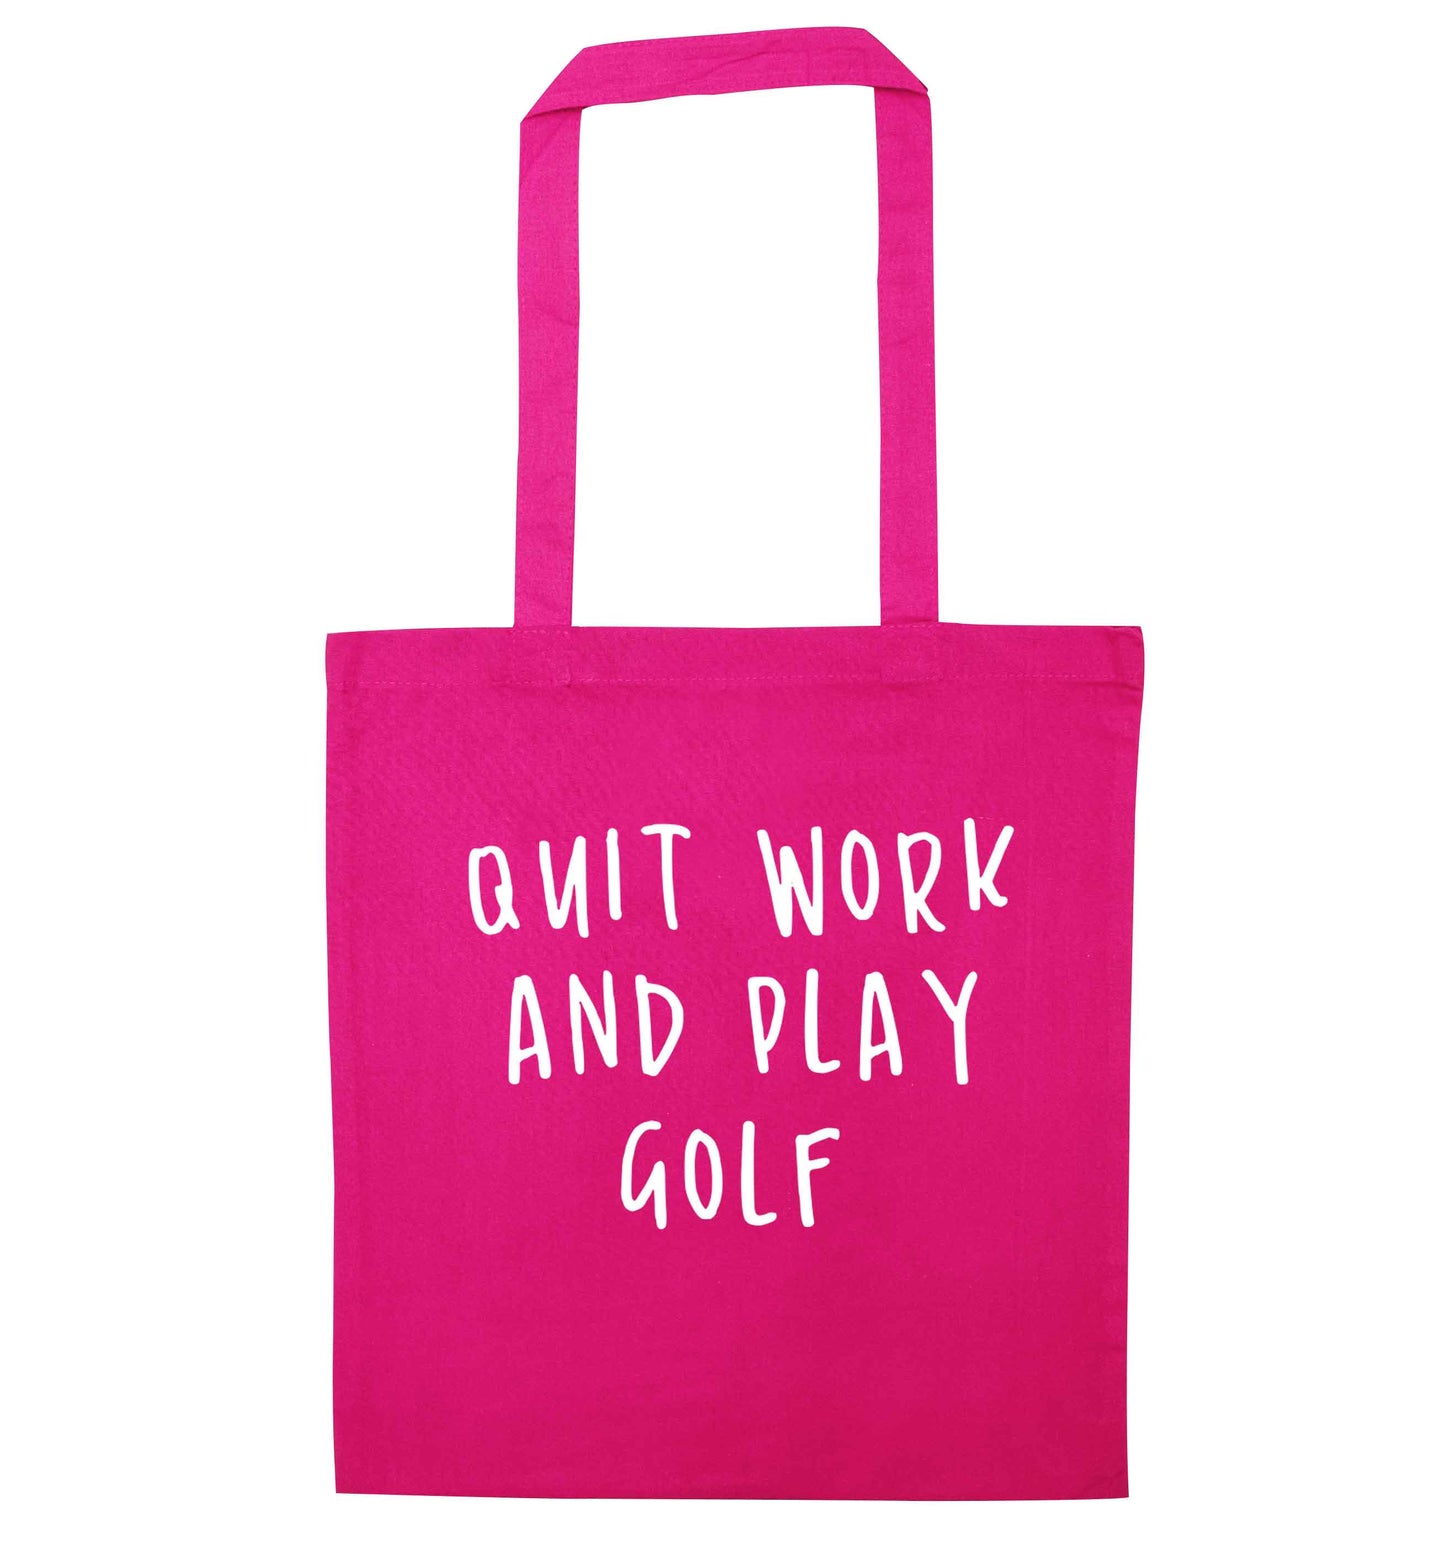 Quit work and play golf pink tote bag